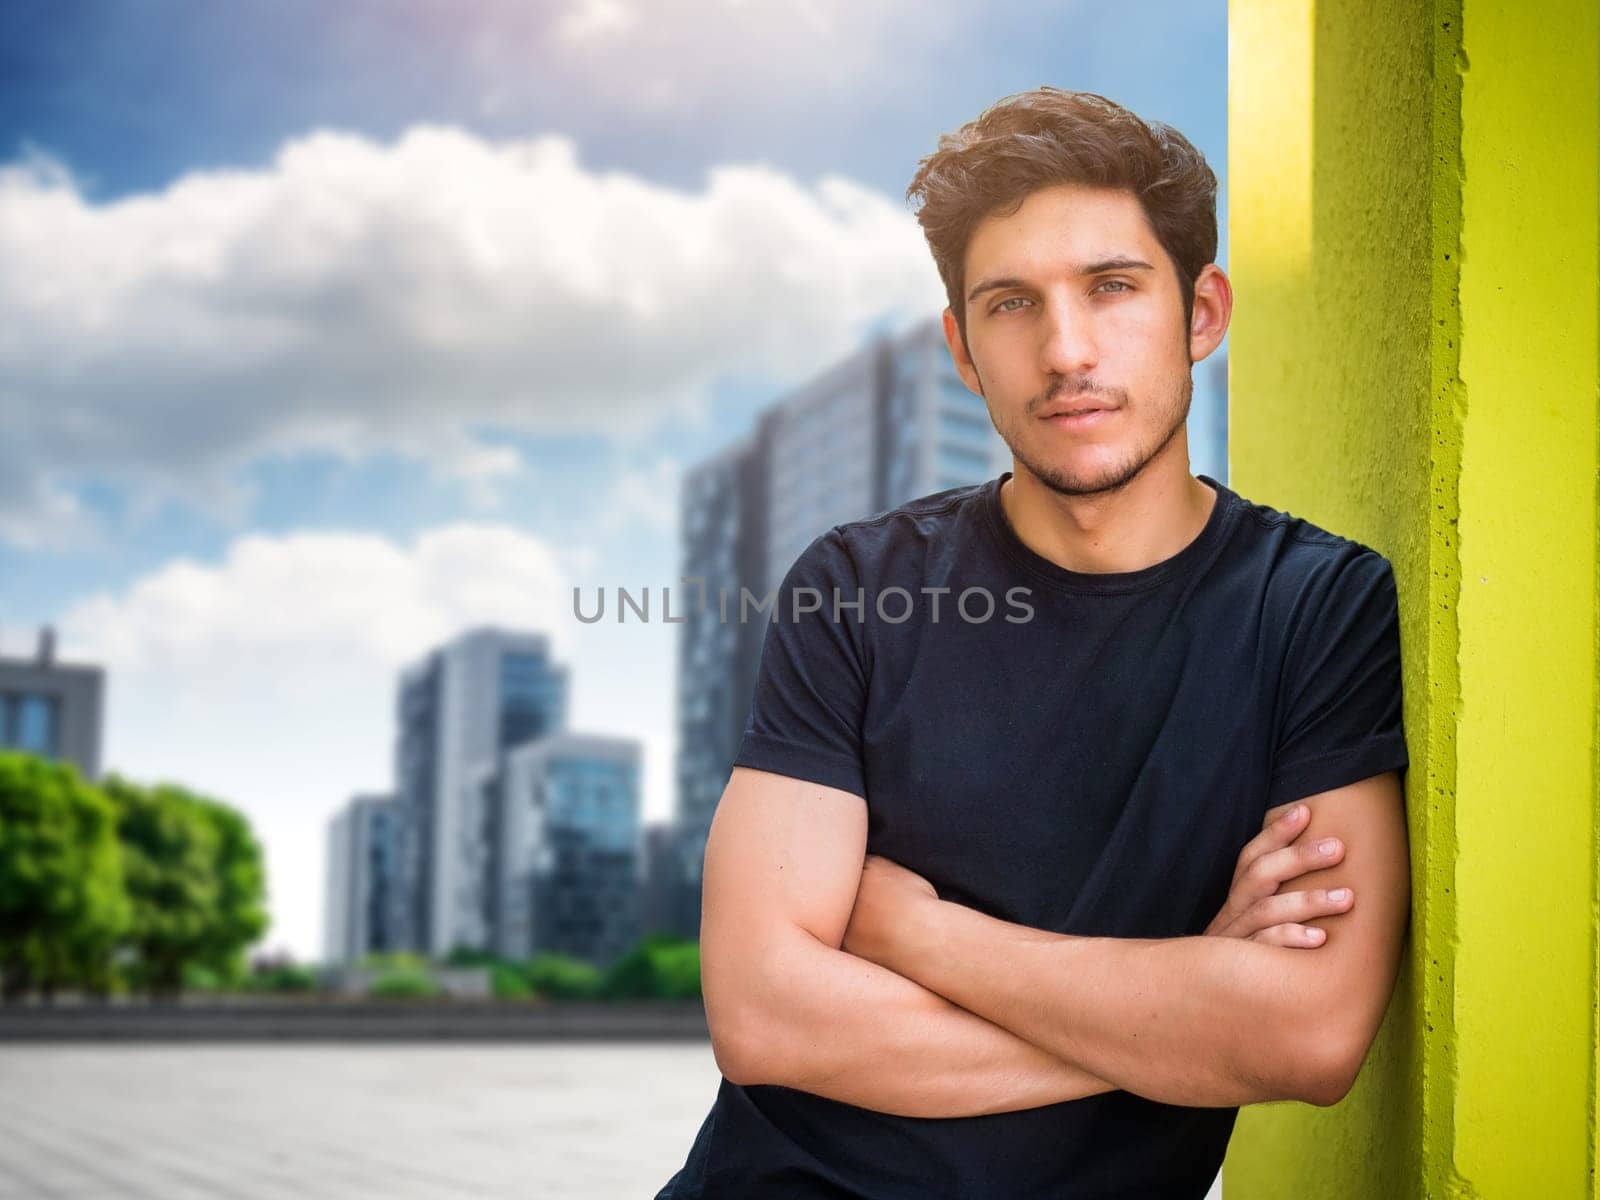 Head and shoulder shot of one handsome young man in urban setting by artofphoto